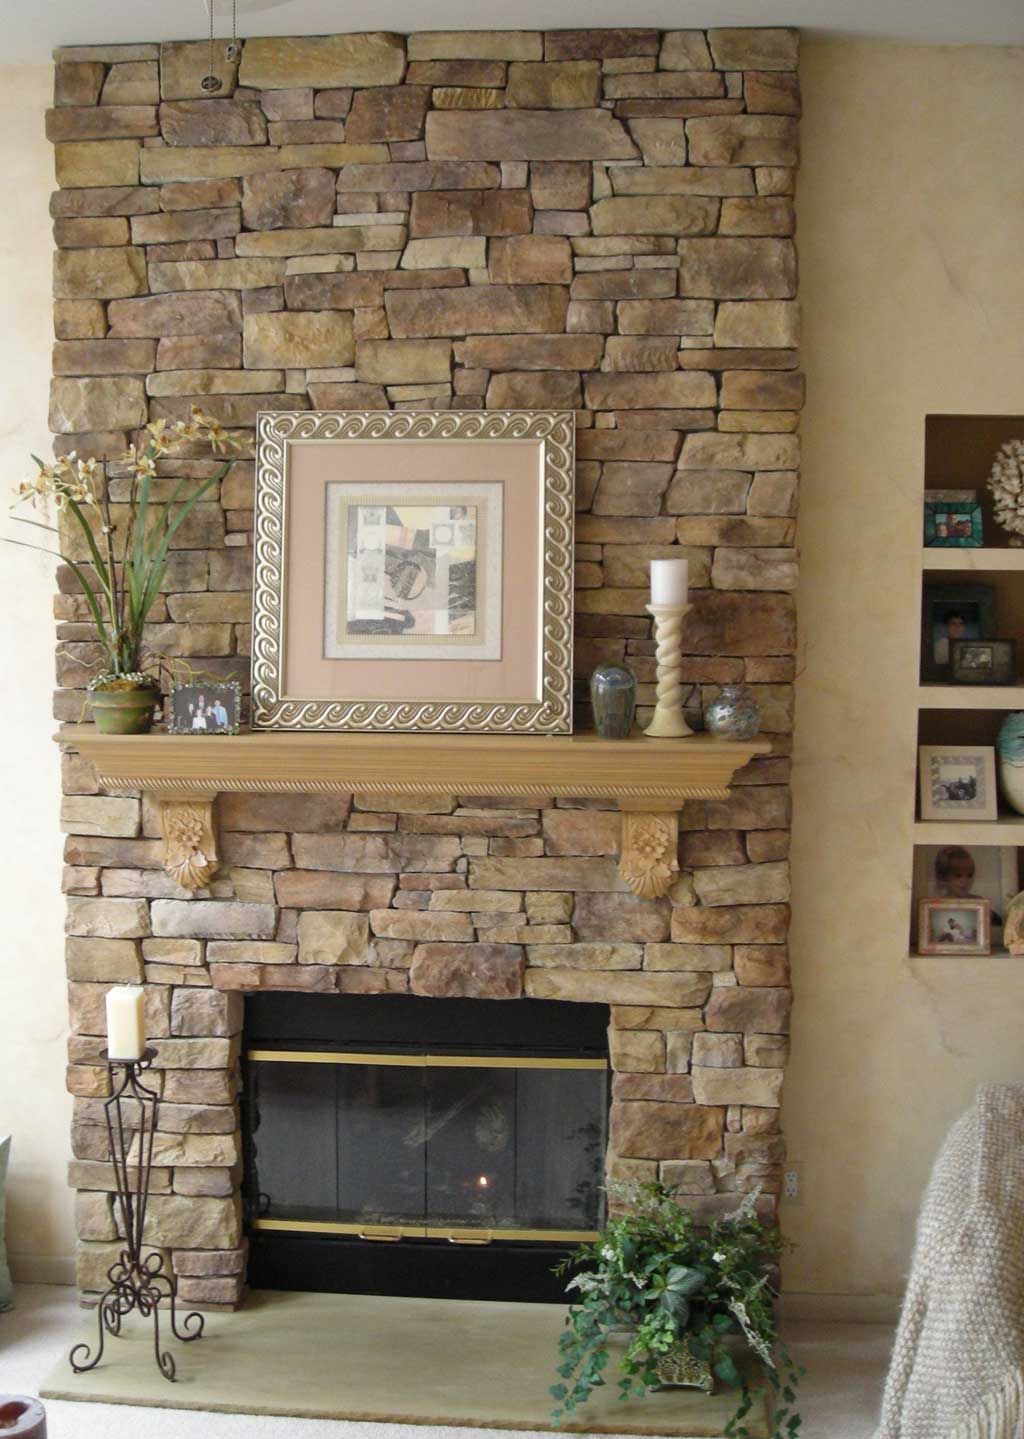 Slate Tile Fireplace Surround New Stone Veneer Fireplace Design Fireplace In 2019